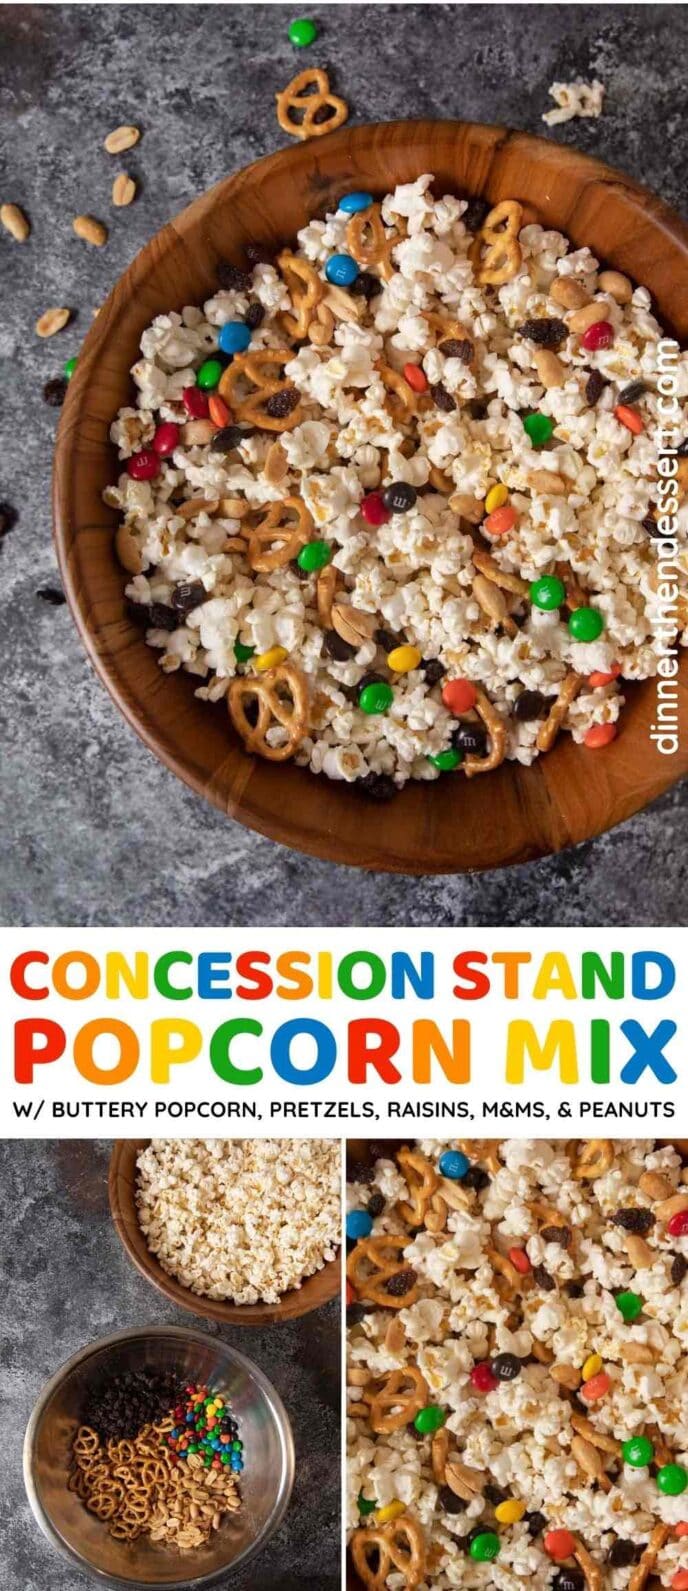 Concession Stand Popcorn Mix collage